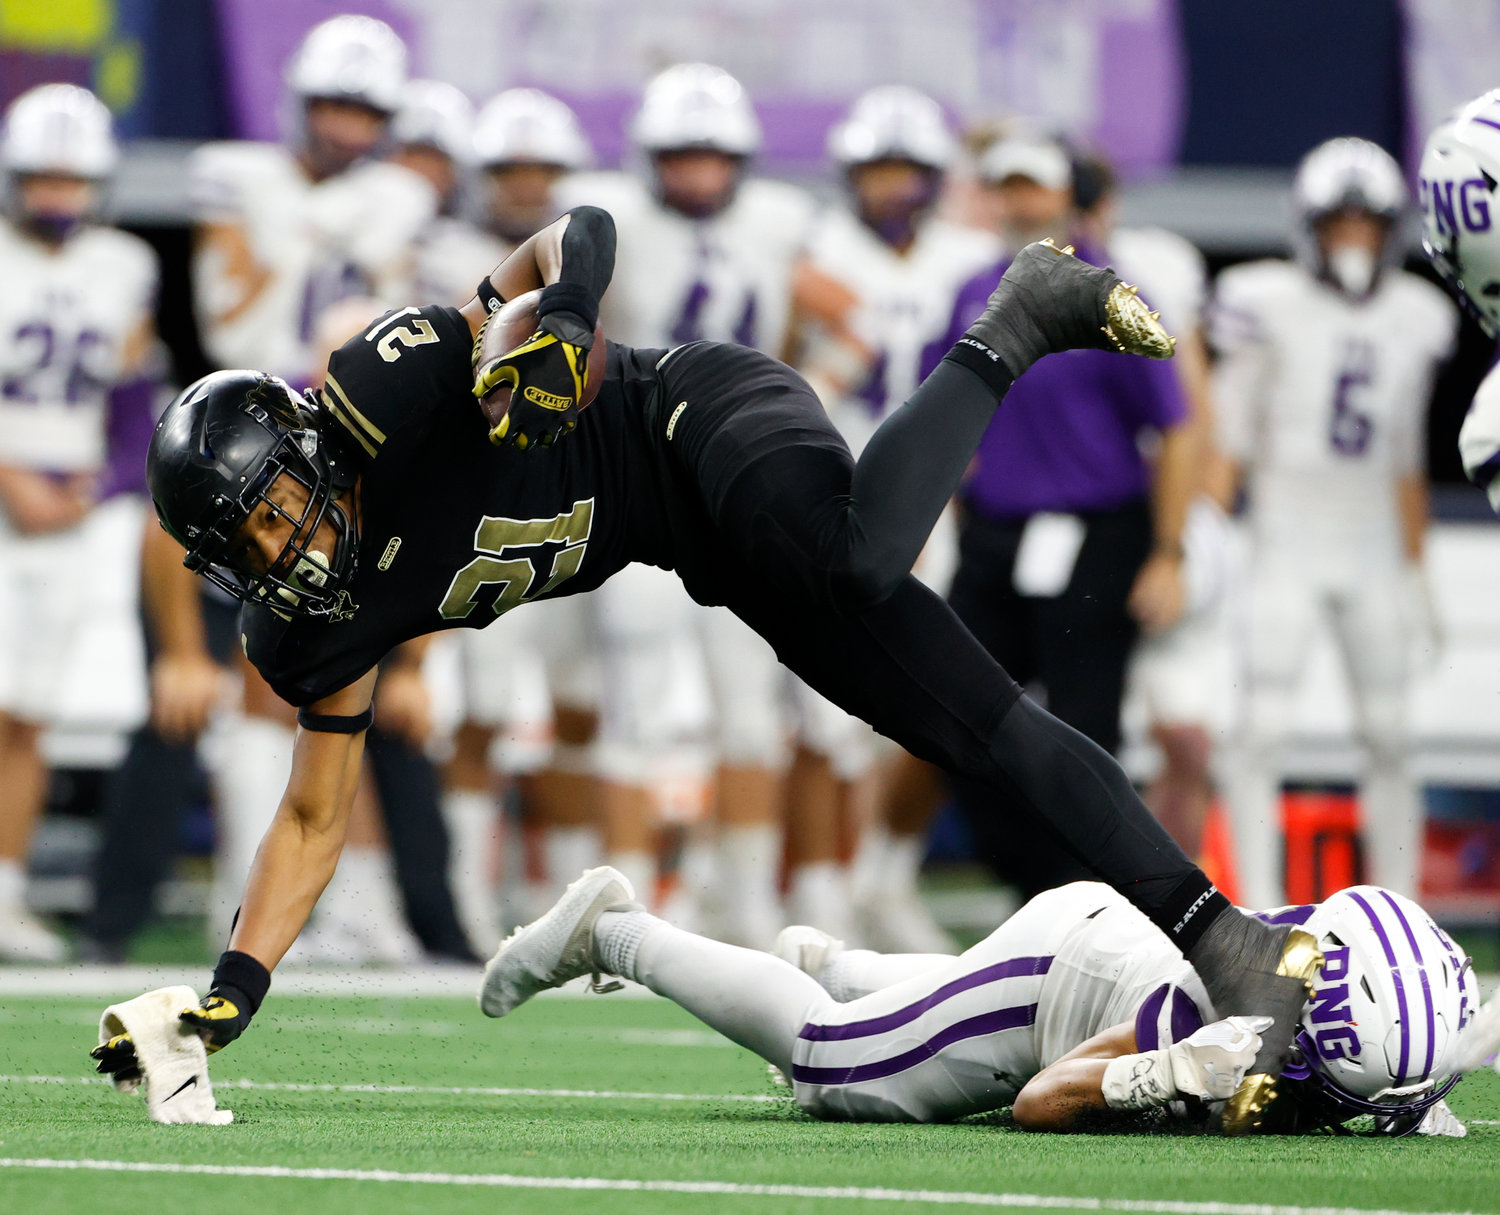 South Oak Cliff running back Danny Green (21) is upended on a carry during the Class 5A Division II football state championship game between South Oak Cliff and Port Neches-Groves in Arlington, Texas, on Dec. 16, 2022.